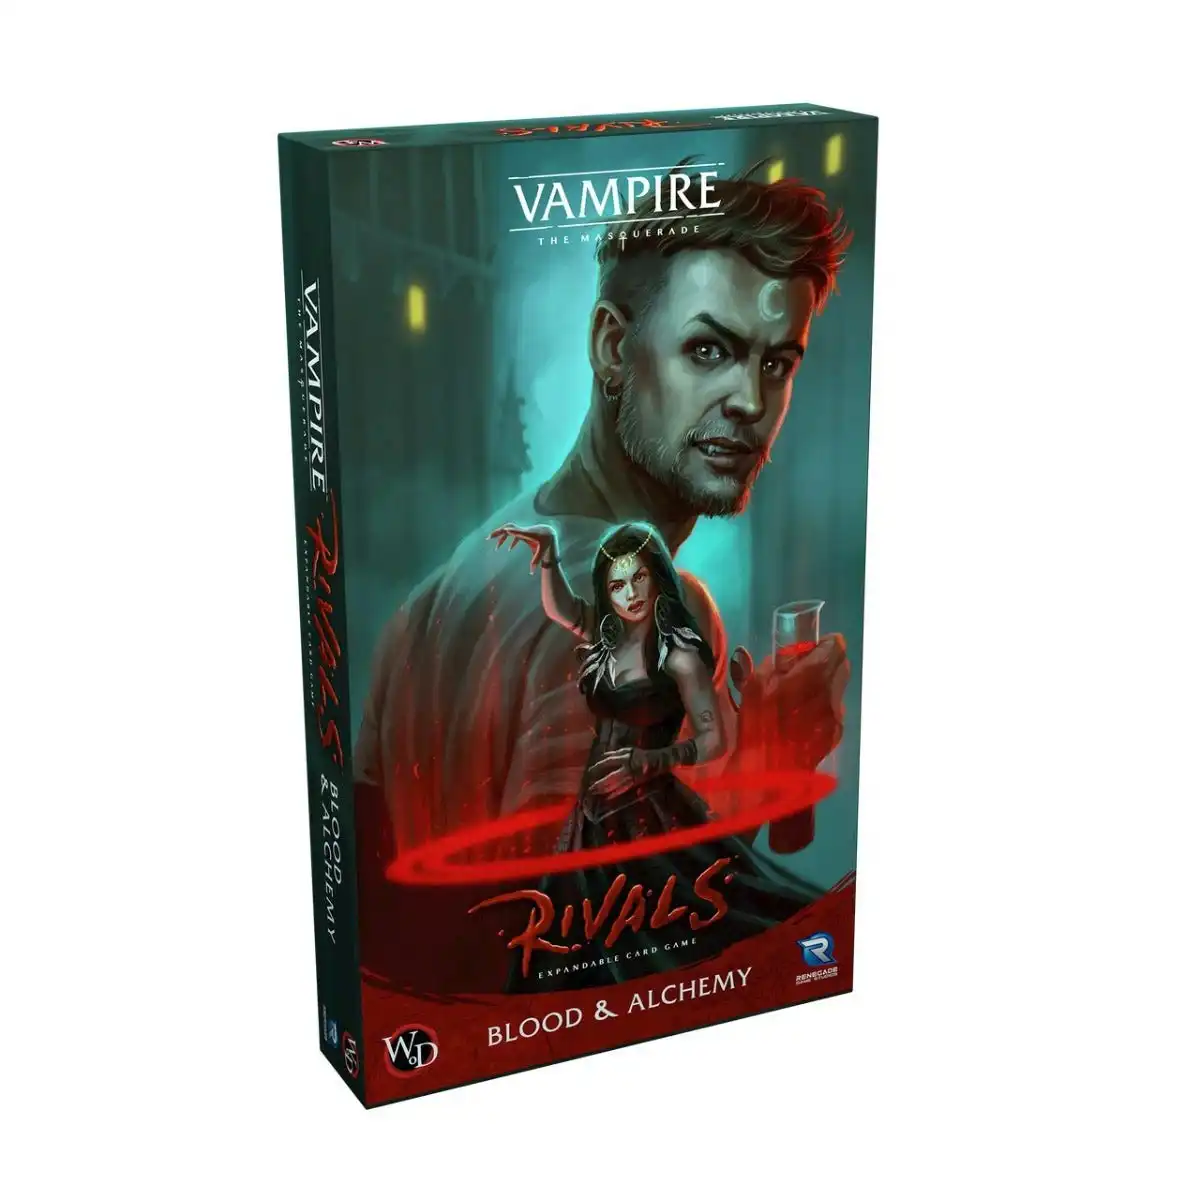 Vampire: The Masquerade Rivals Expandable Card Game - Blood & Alchemy Expansion